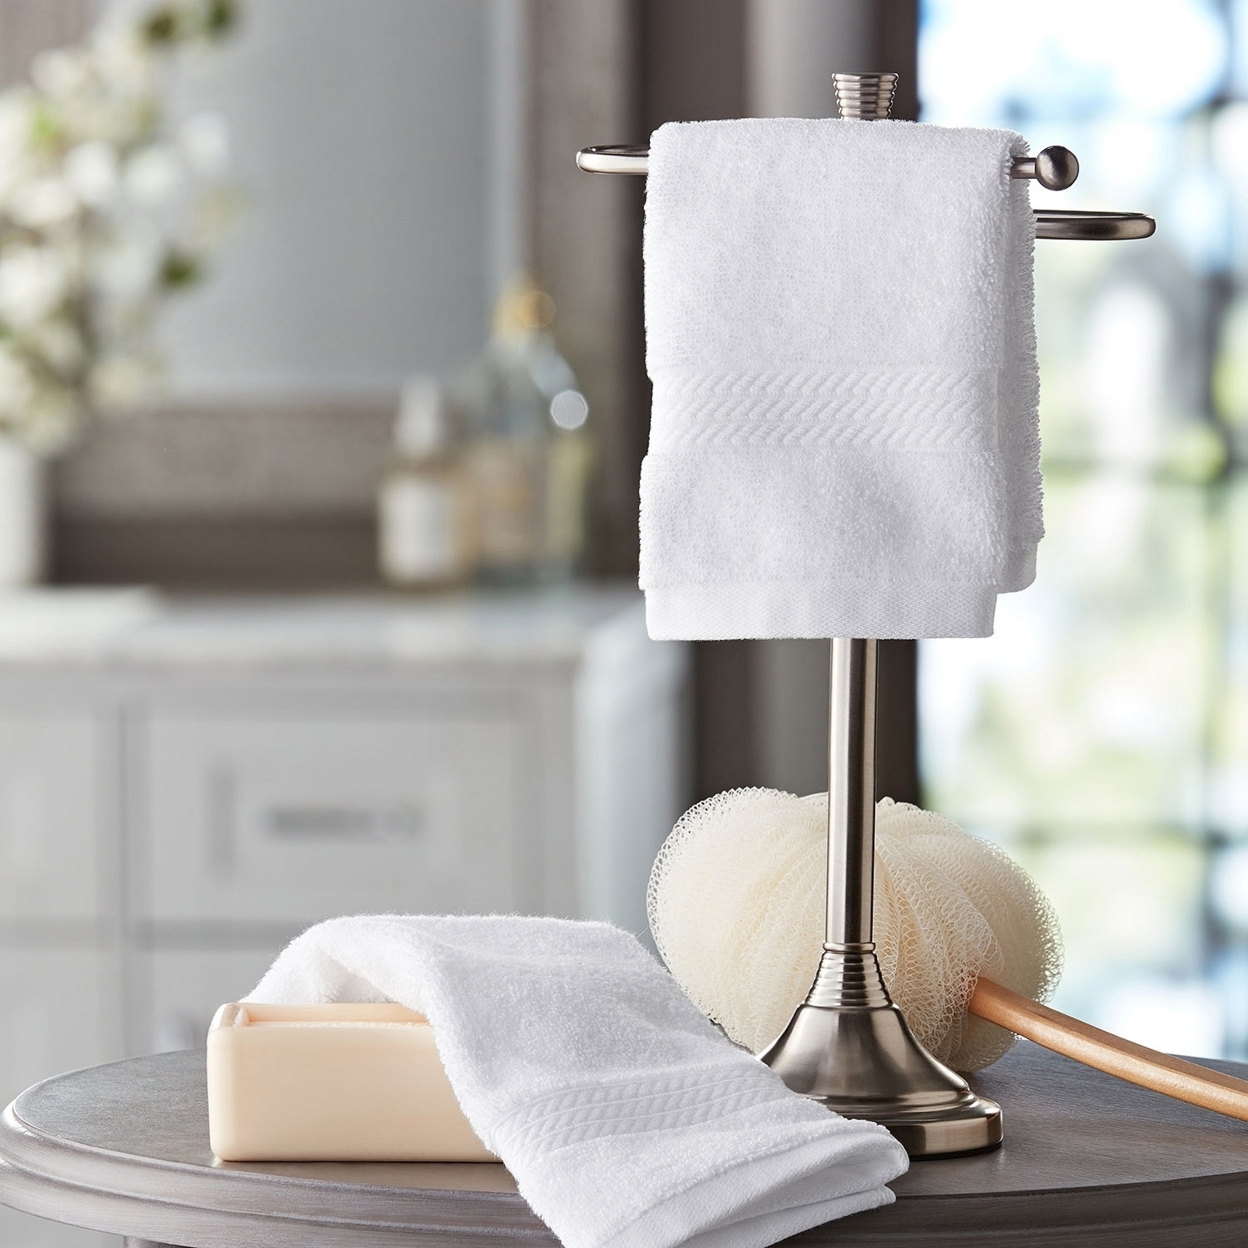 Hotel Premier Collection 100% Cotton Luxury Washcloth, 2-pack, White